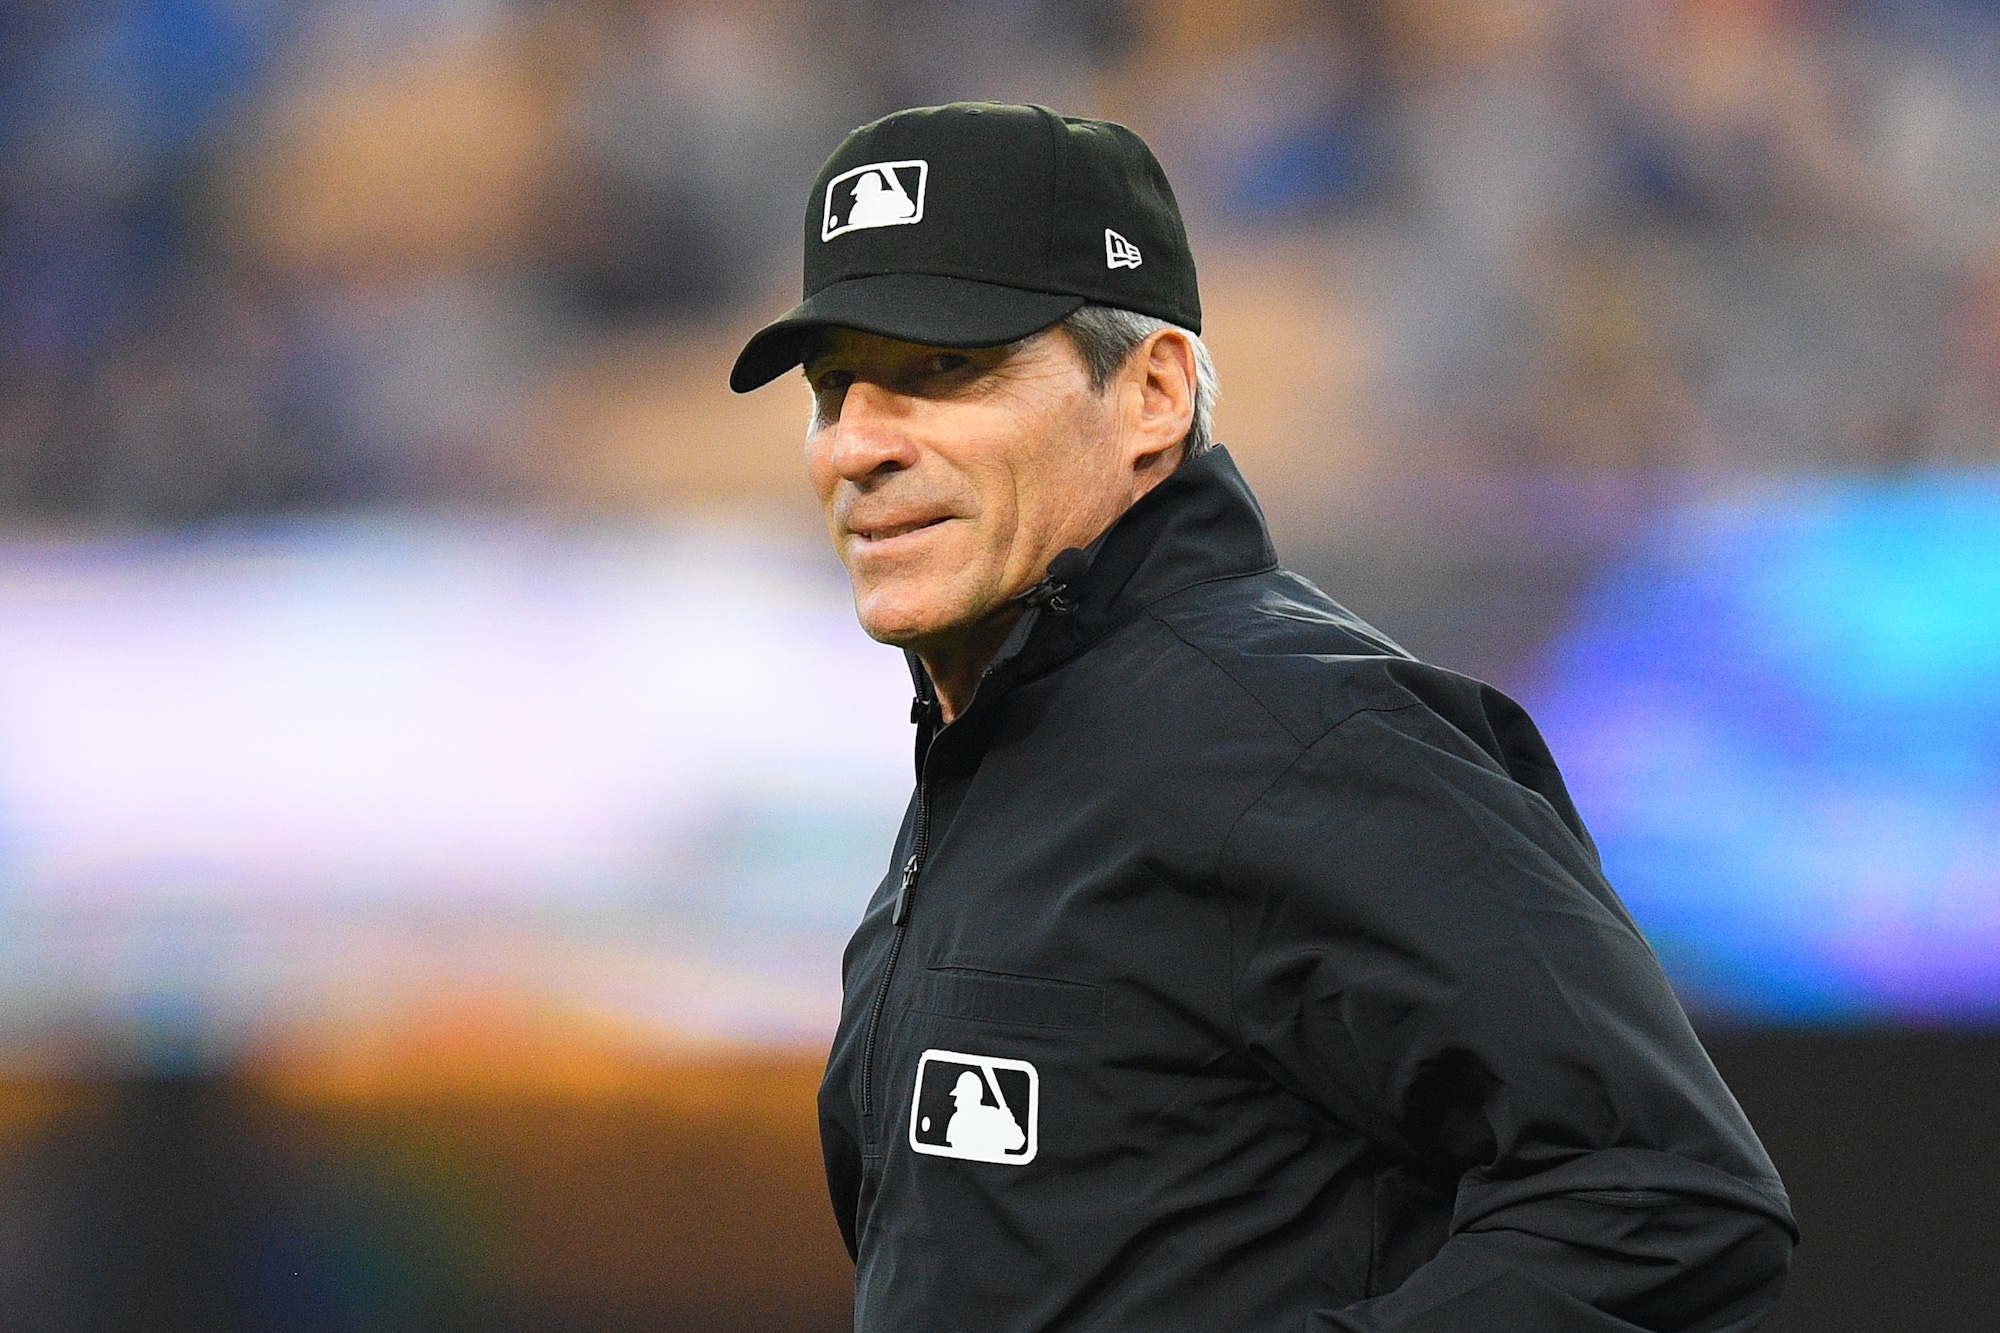 LOS ANGELES, CA - APRIL 19: Umpire Angel Hernandez looks on during the MLB game between the New York Mets and the Los Angeles Dodgers on April 19, 2024 at Dodger Stadium in Los Angeles, CA. (Photo by Brian Rothmuller/Icon Sportswire via Getty Images)